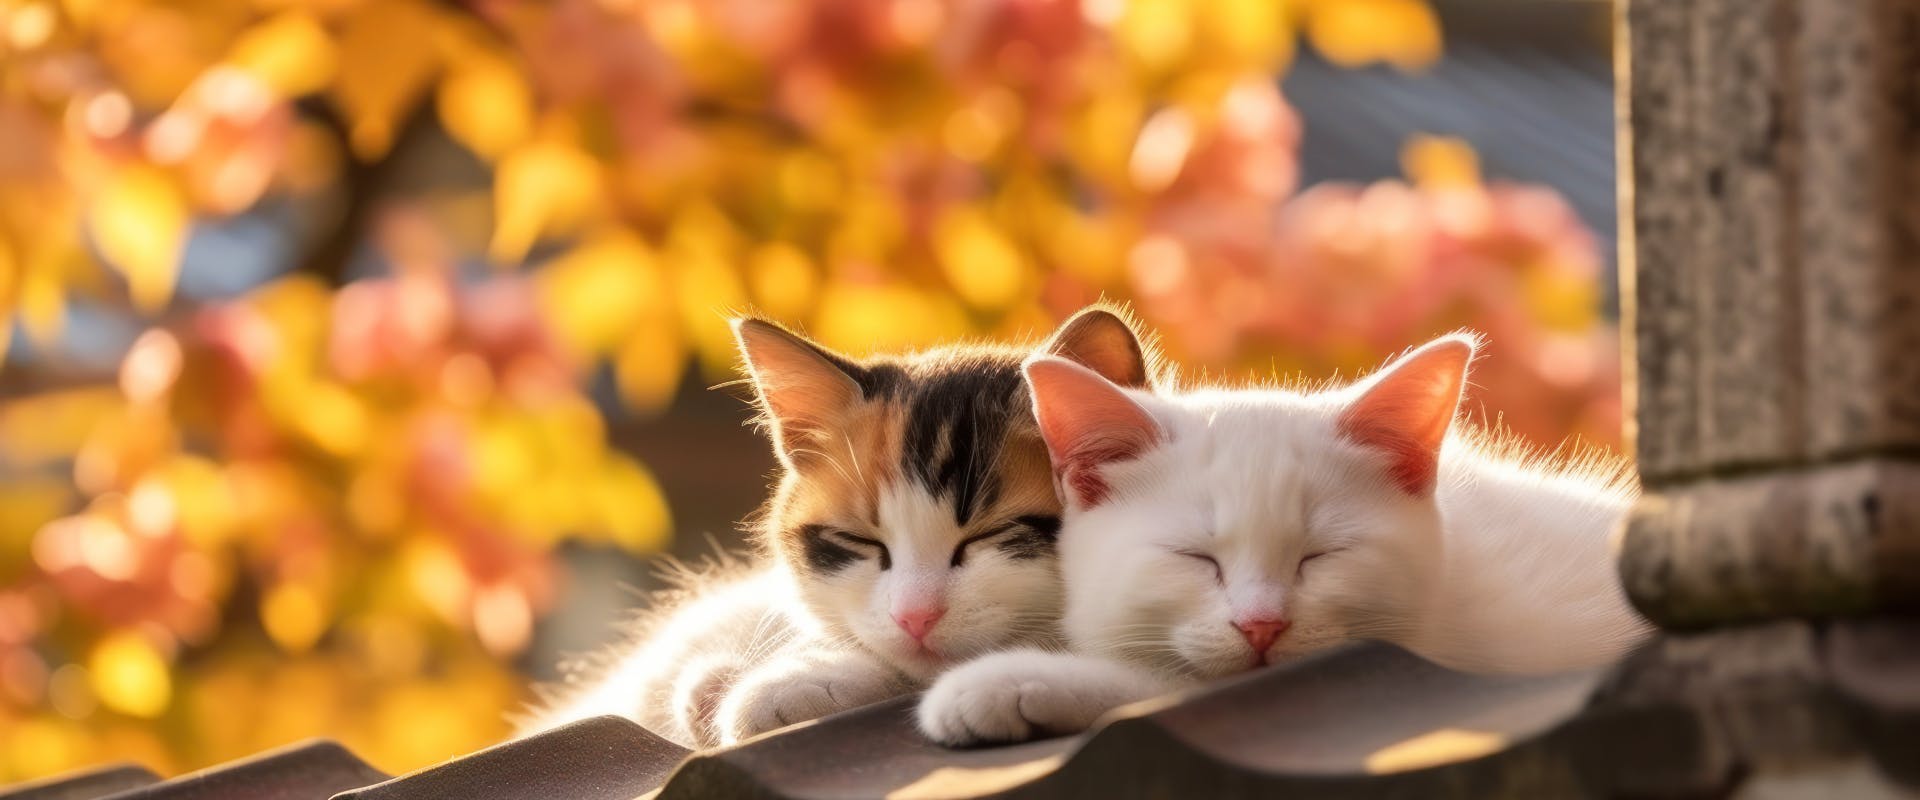 two kittens sleeping on a roof with autumn leaves in the background